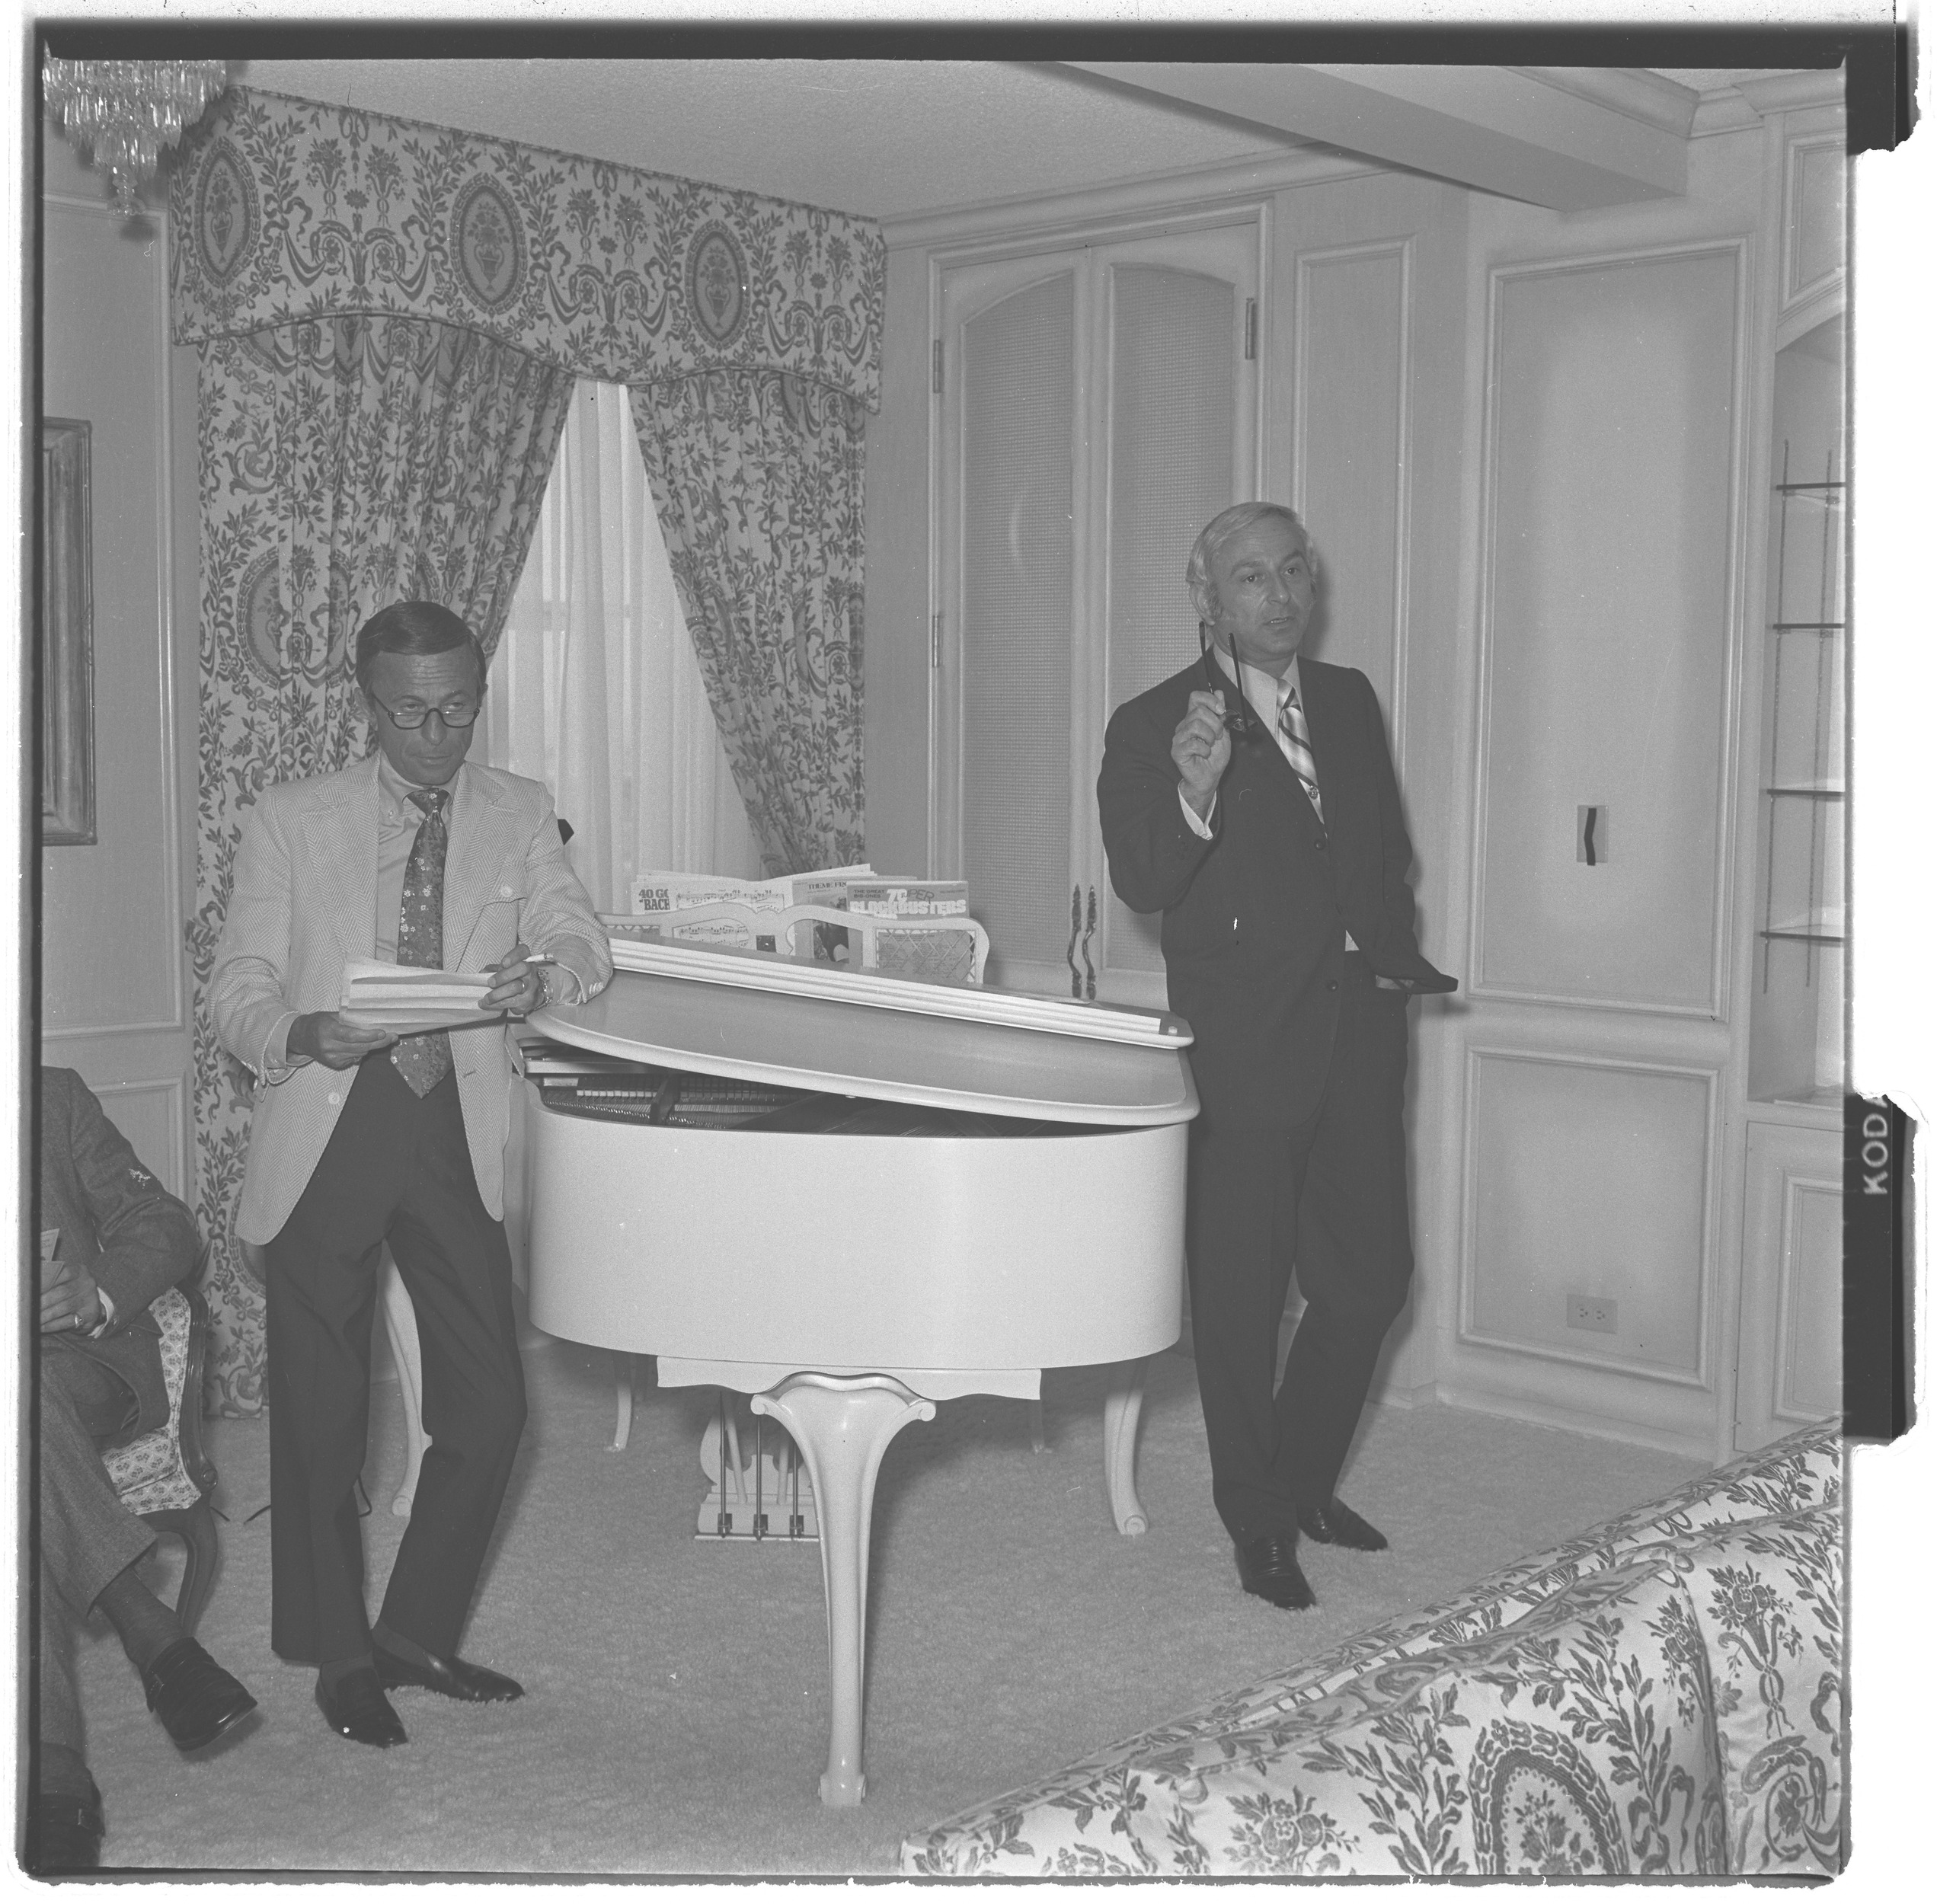 Photographs of Combined Jewish Appeal Caesars Palace with Anthony Quinn and Ed Sullivan, image 06